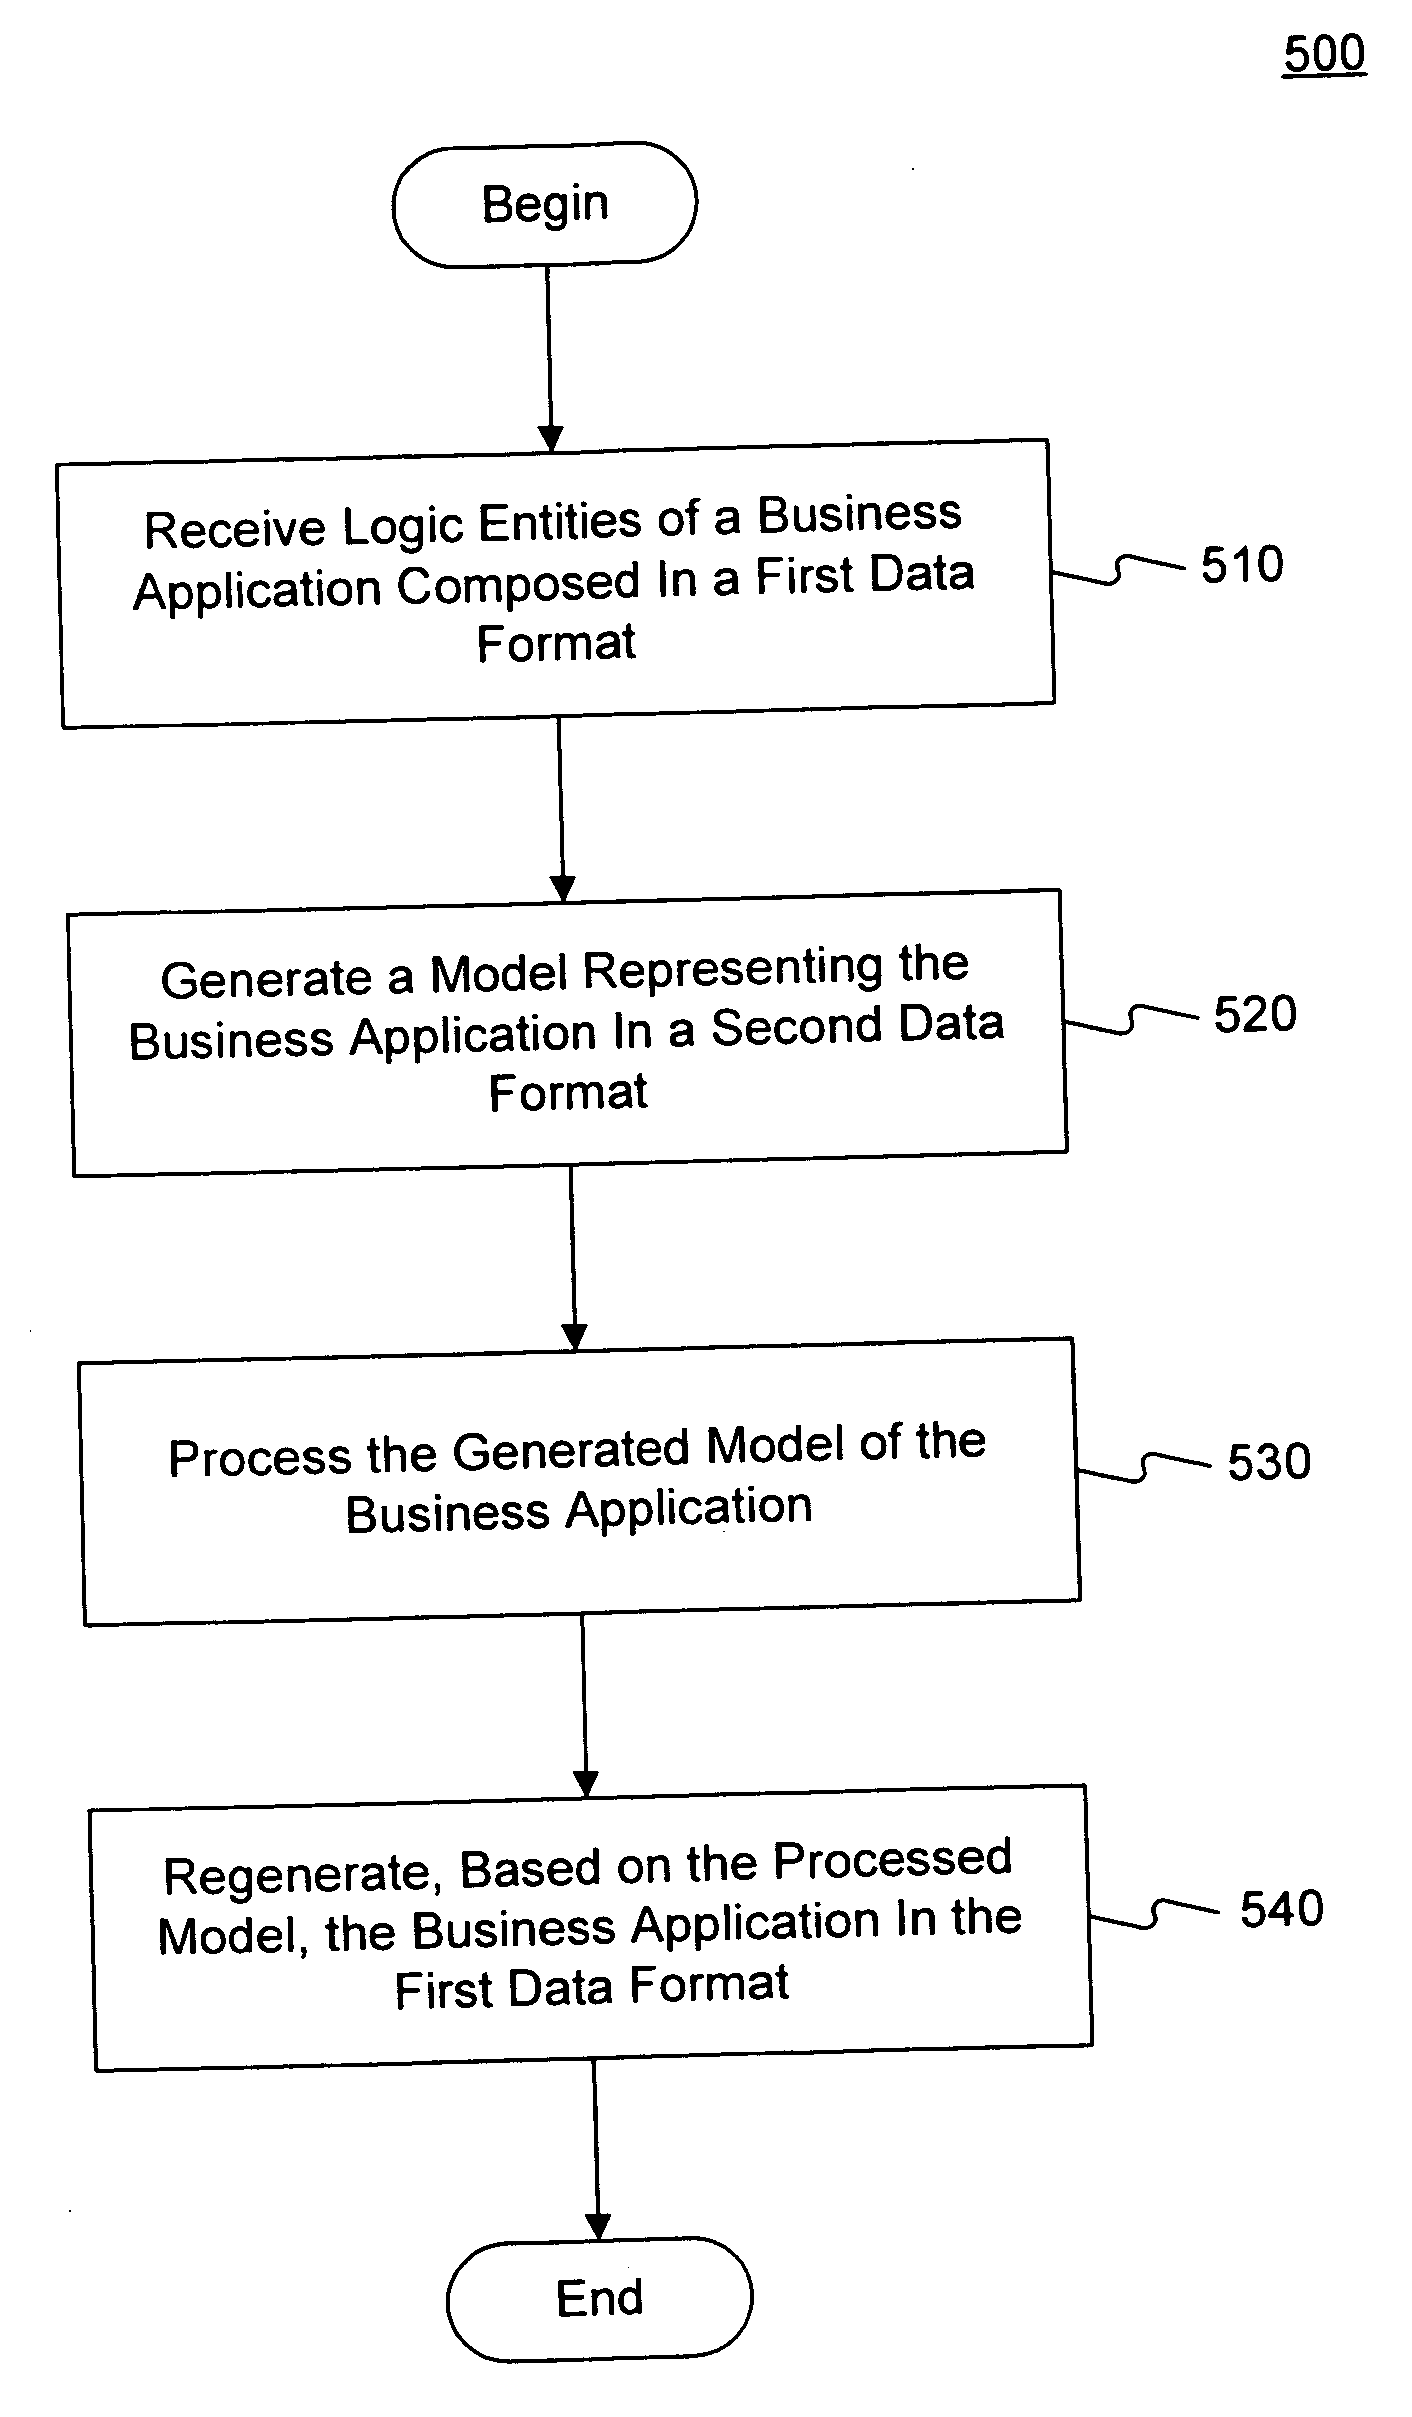 Methods of transforming application layer structure as objects